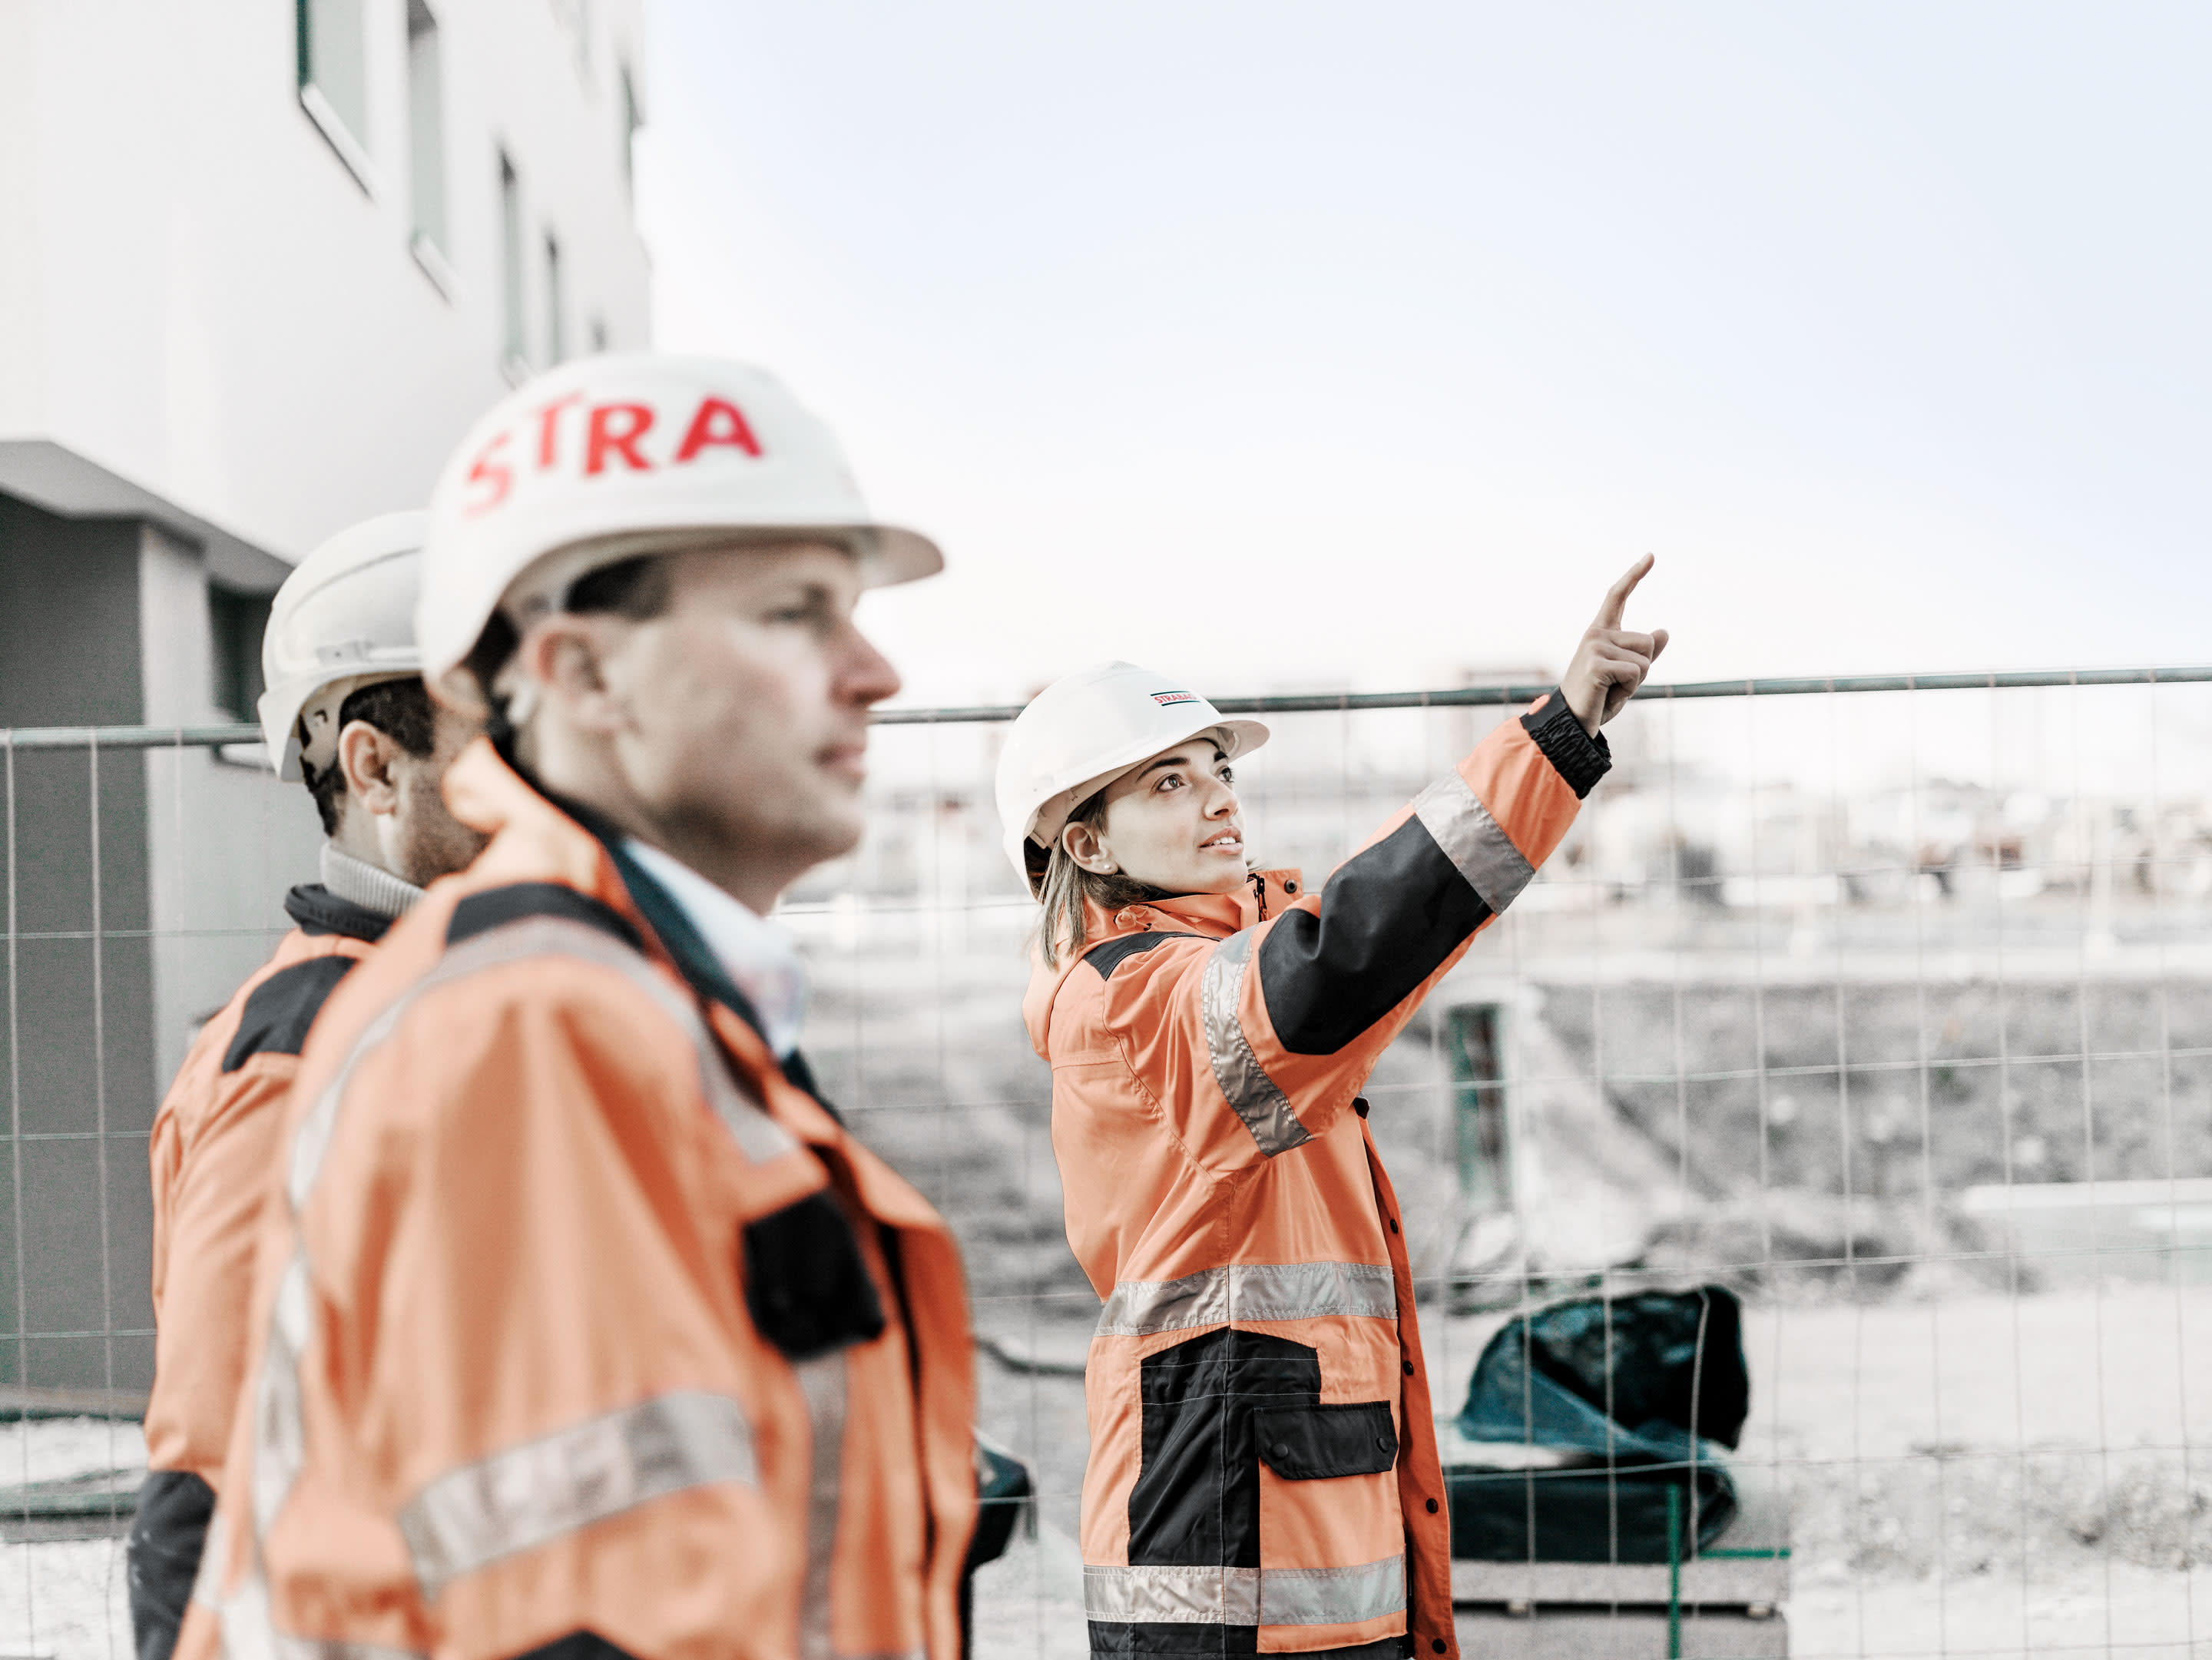 Image: STRABAG employees on the construction site in front of a building